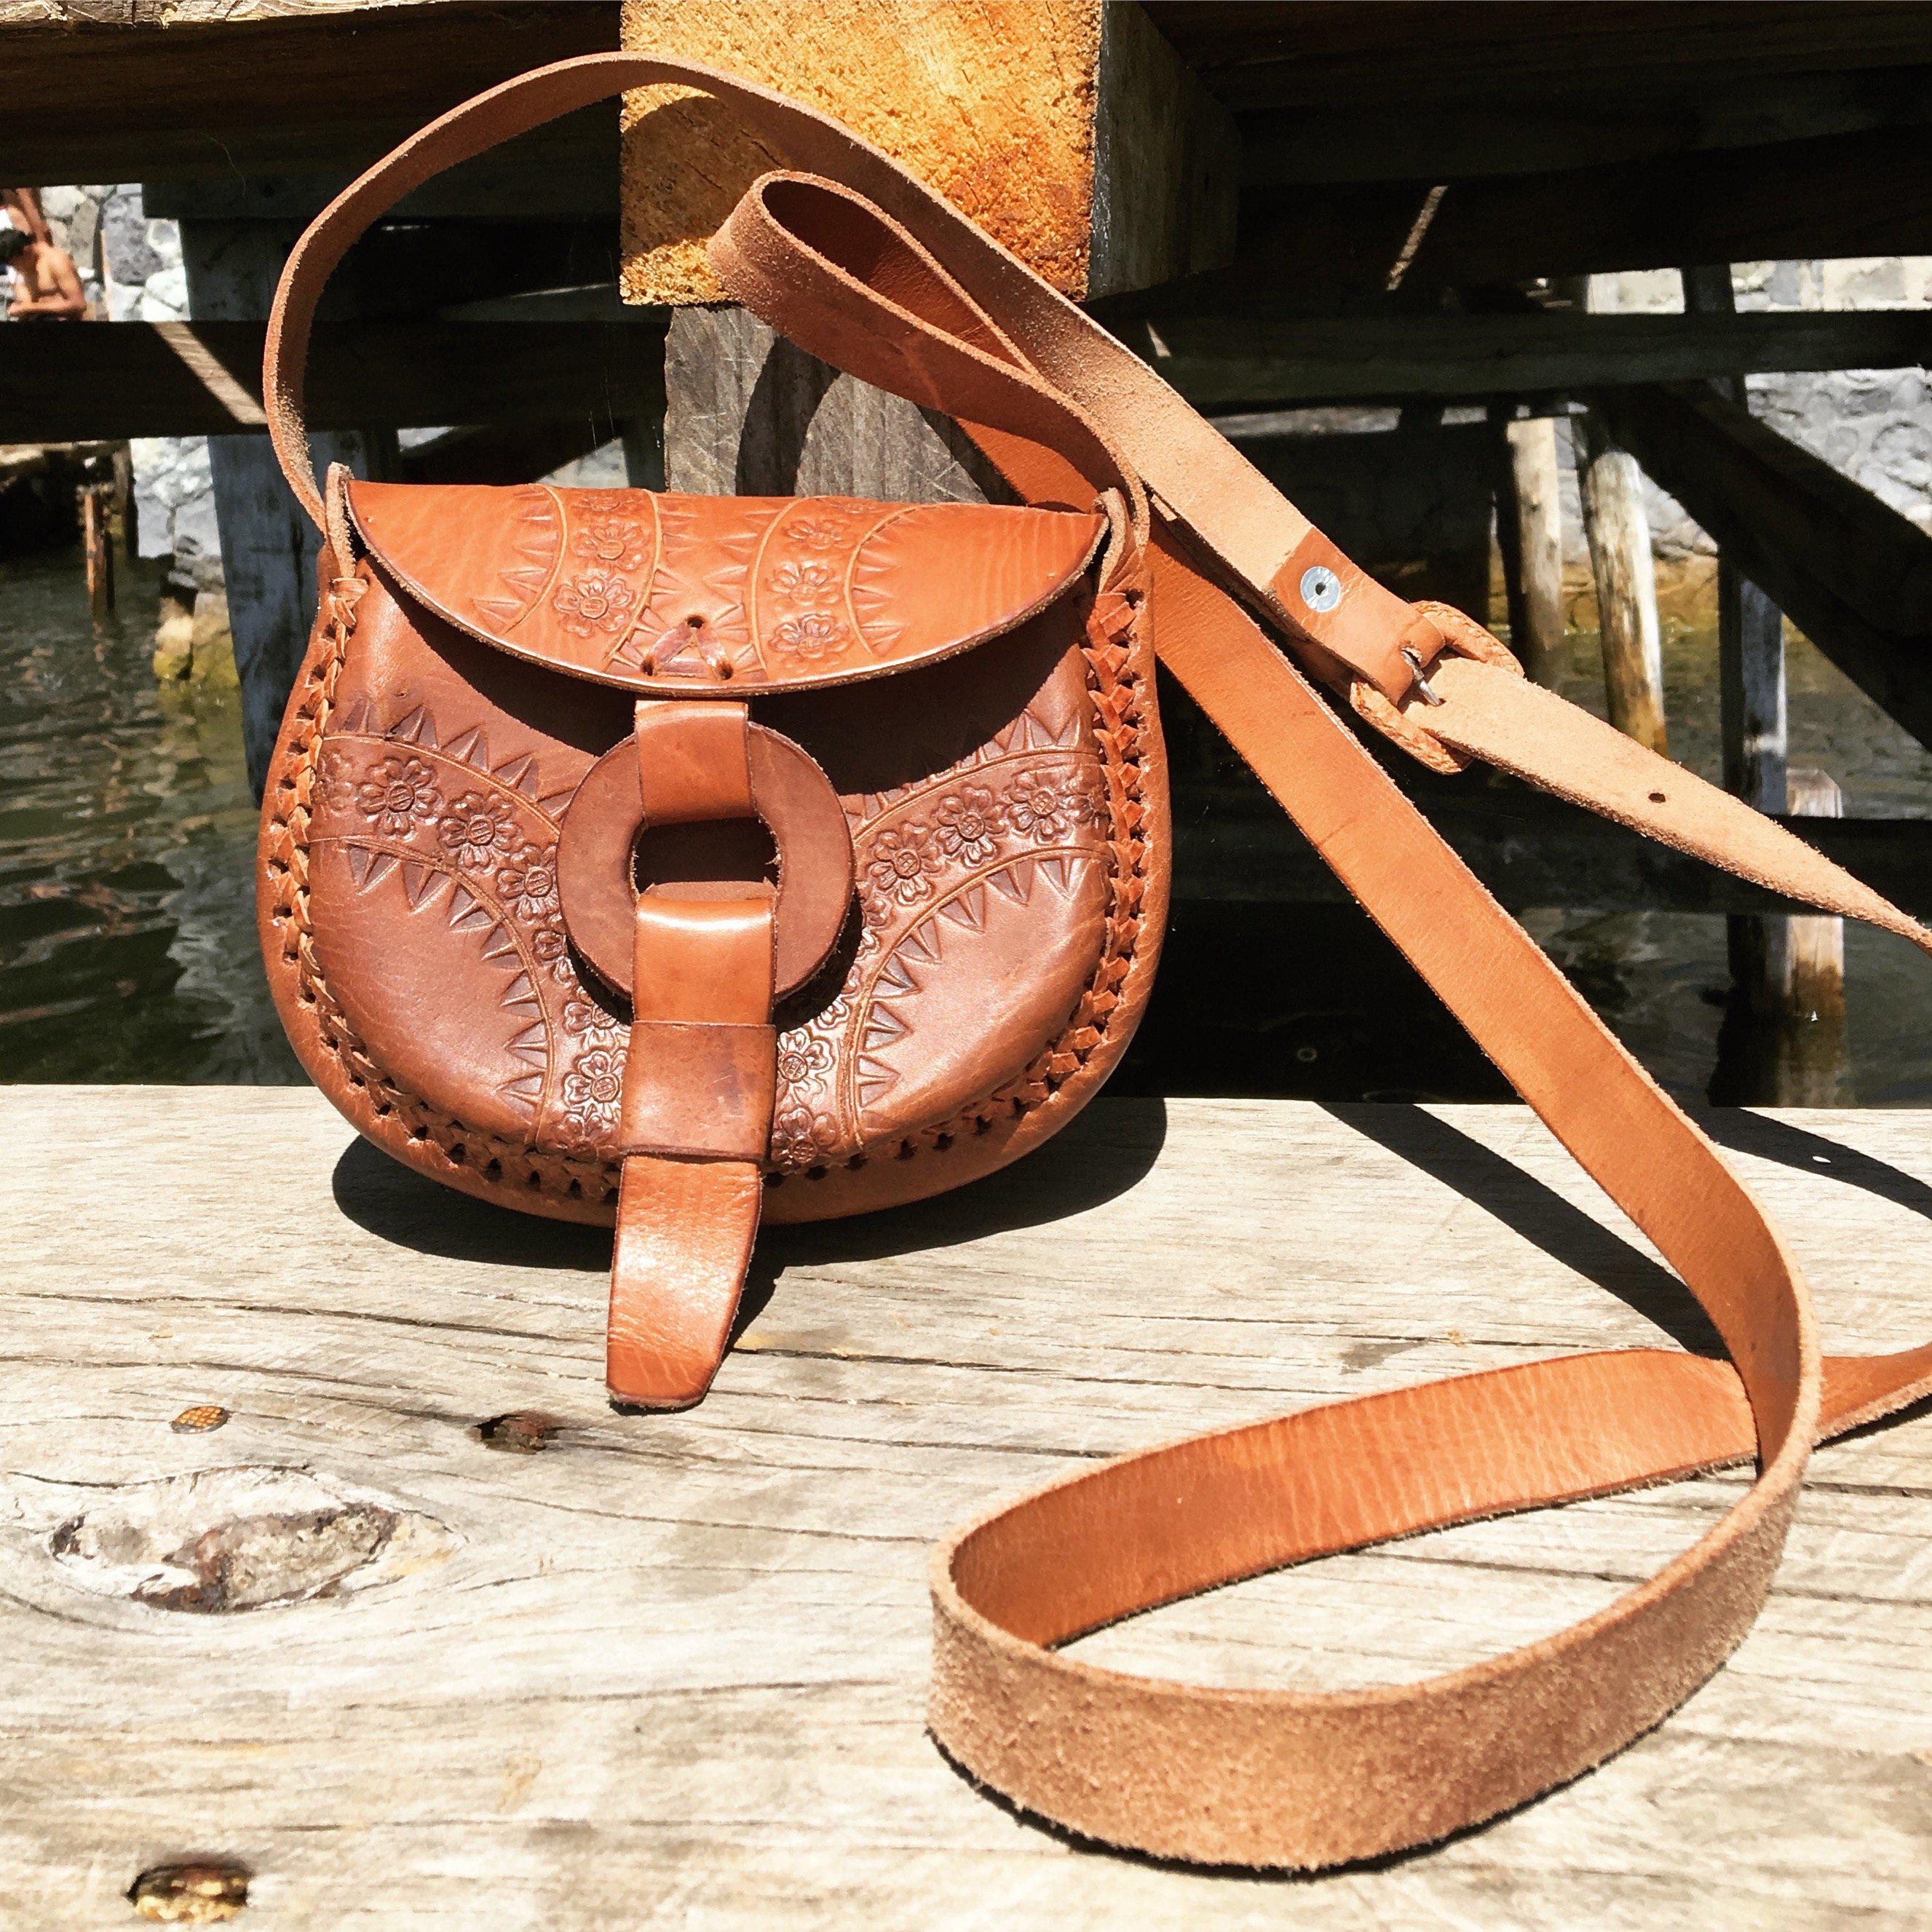 Buffalo Leather Purses & Bags for Women - Made in USA